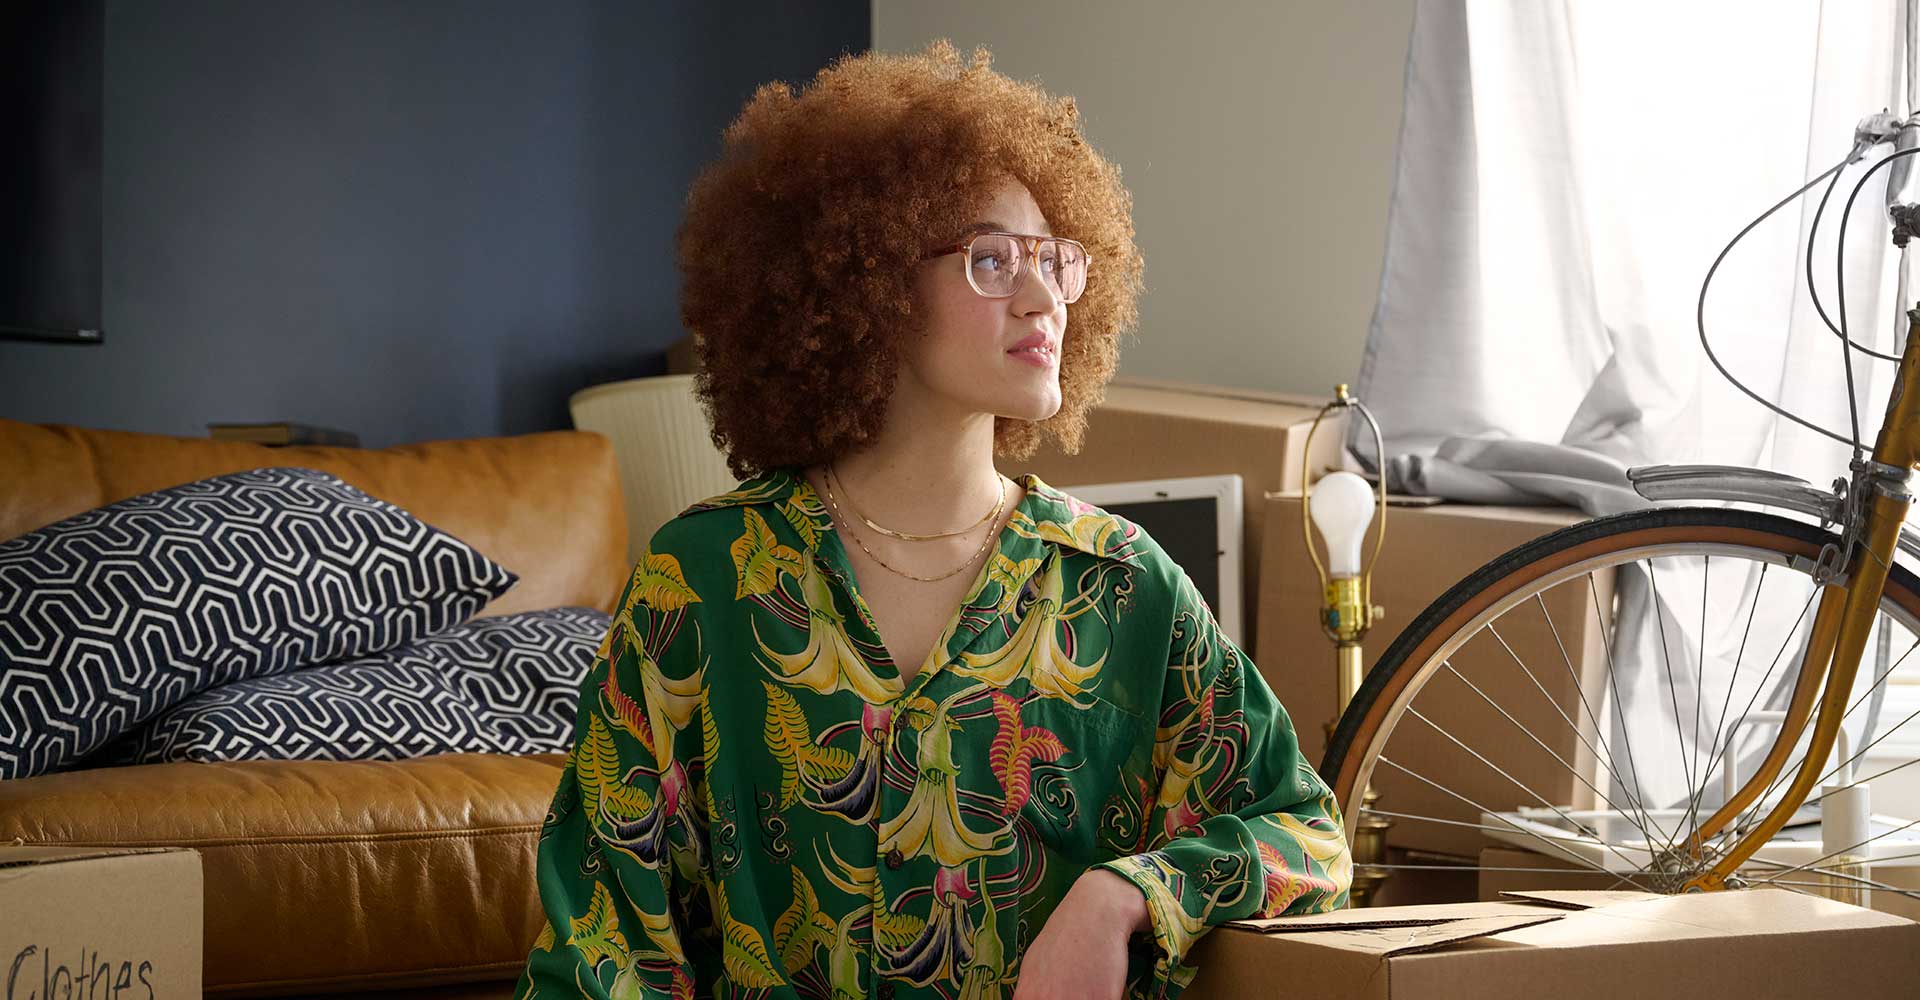 Young woman wearing 70's style glasses and green floral blouse sitting on an apartment floor and looking out a window while surrounded by moving boxes and a bicycle.